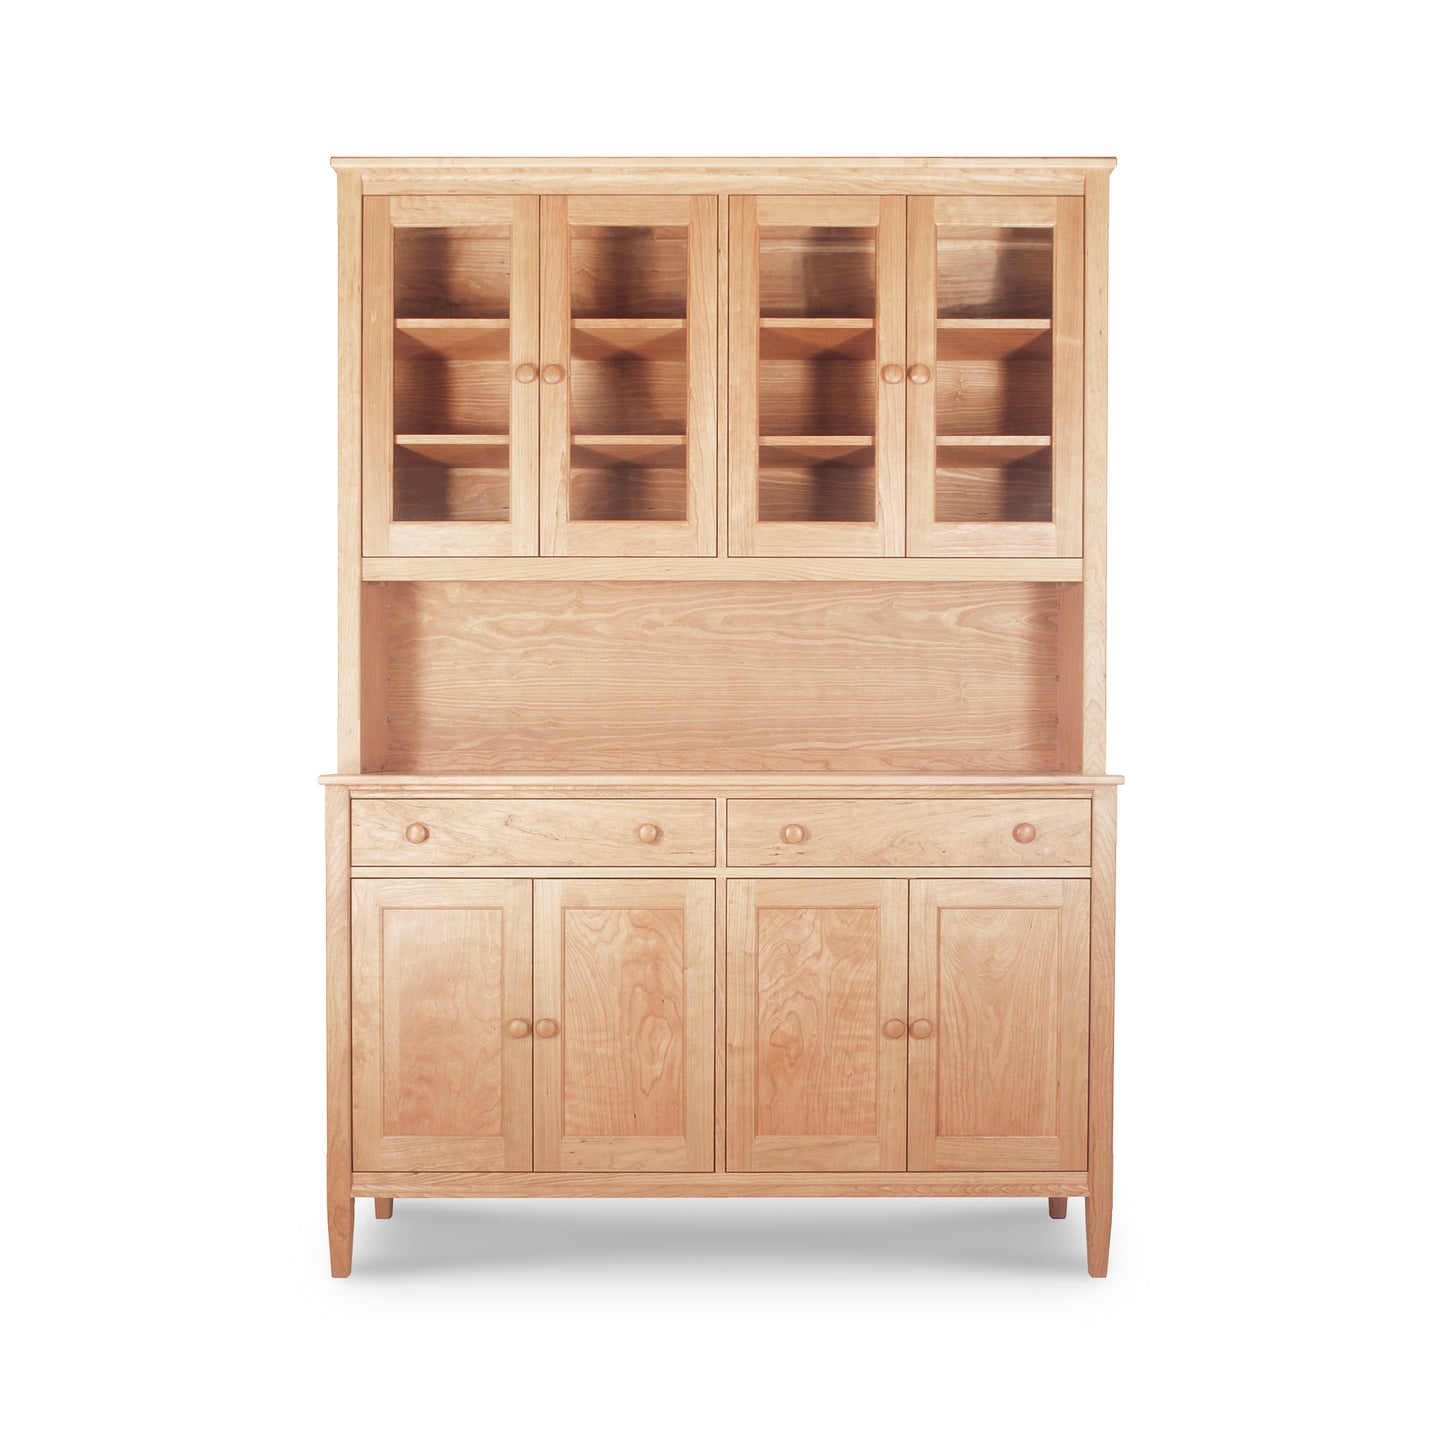 A genuine Vermont craftsmanship creation, this wooden hutch with glass doors showcases natural cherry wood in the form of a Maple Corner Woodworks Vermont Shaker Large China Cabinet.